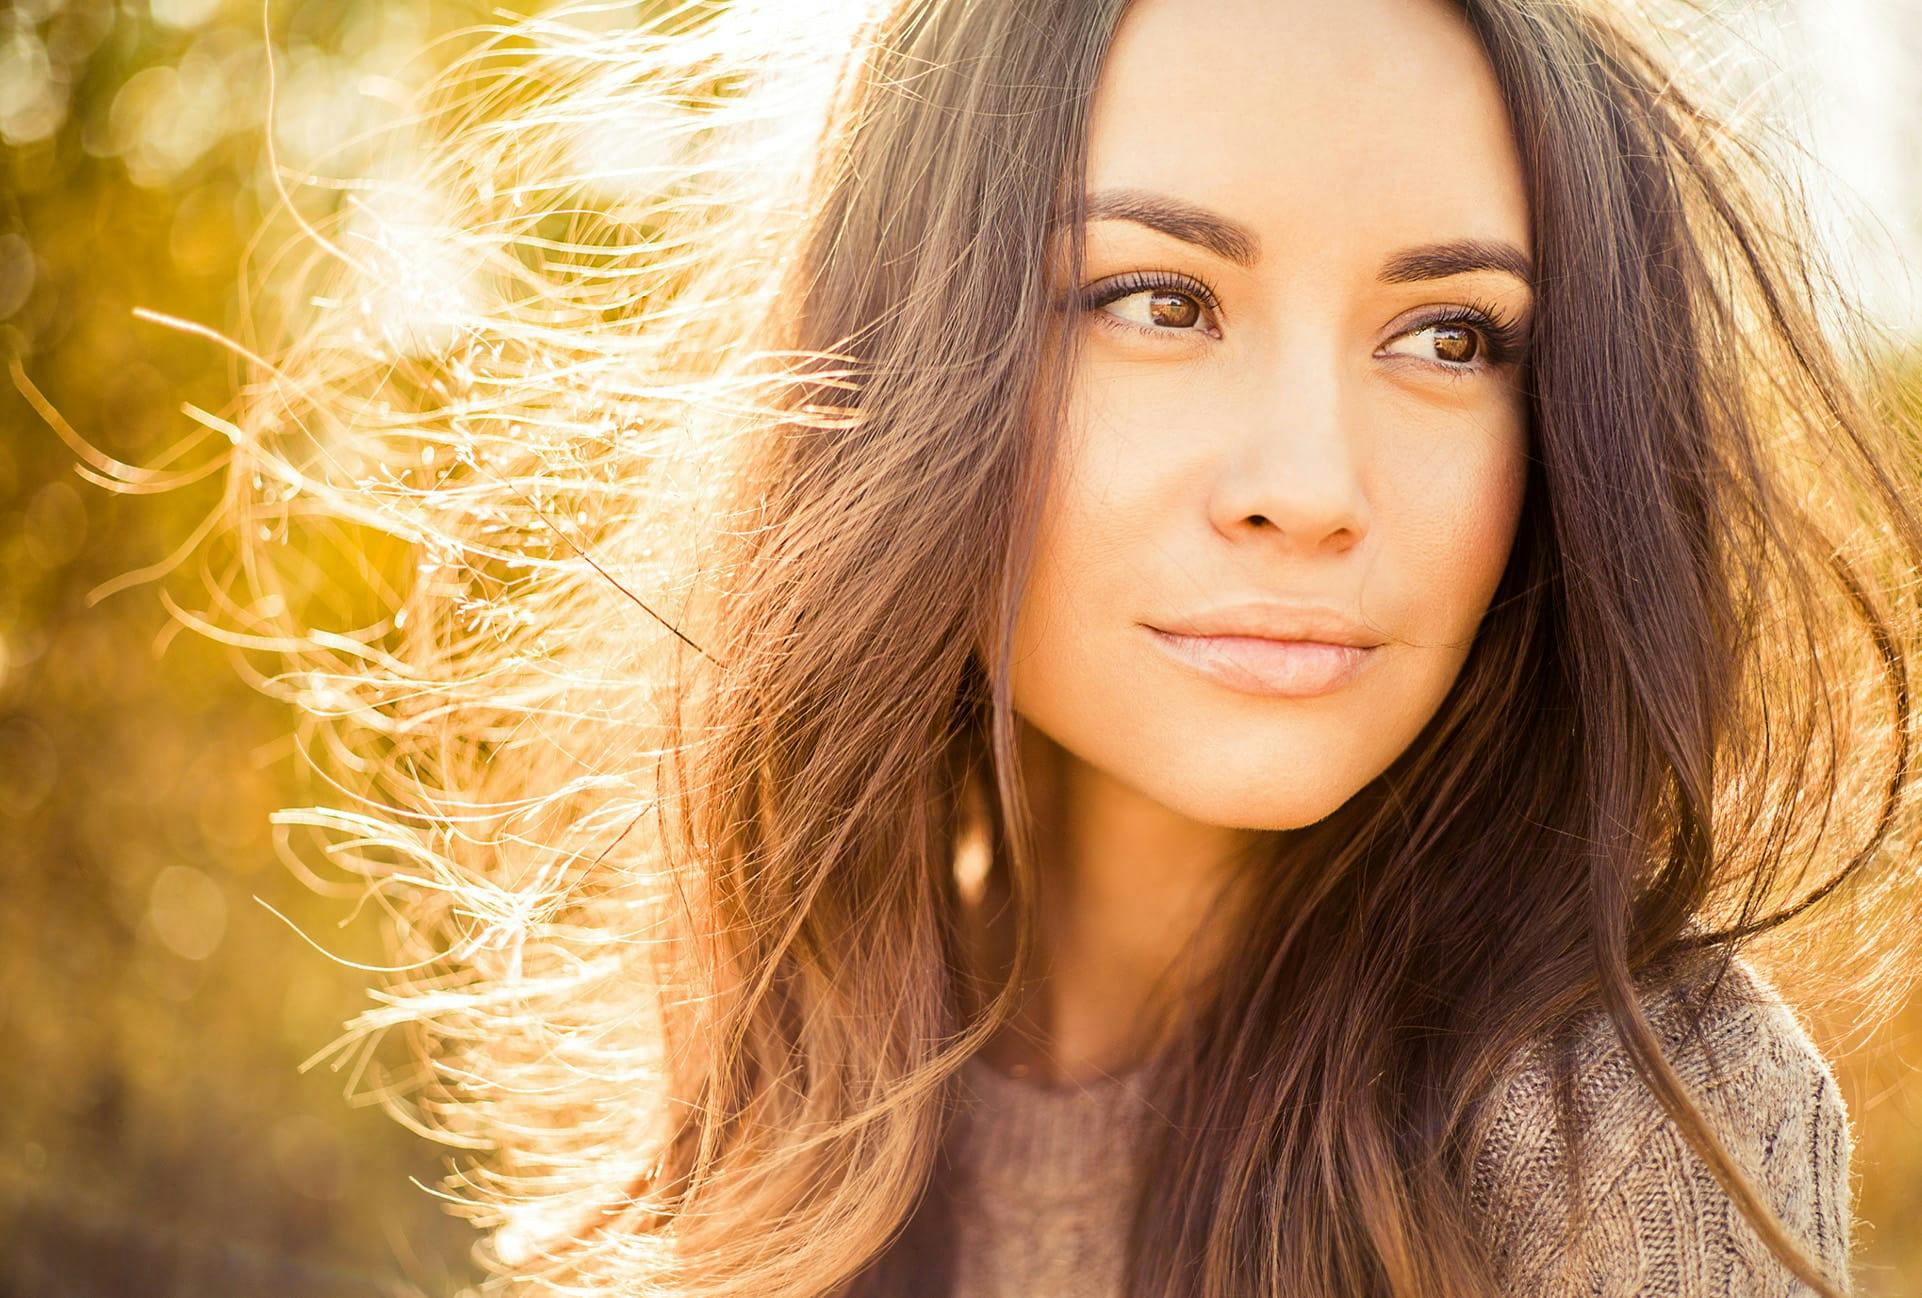 Beautiful woman with long brown hair standing in the sunlight